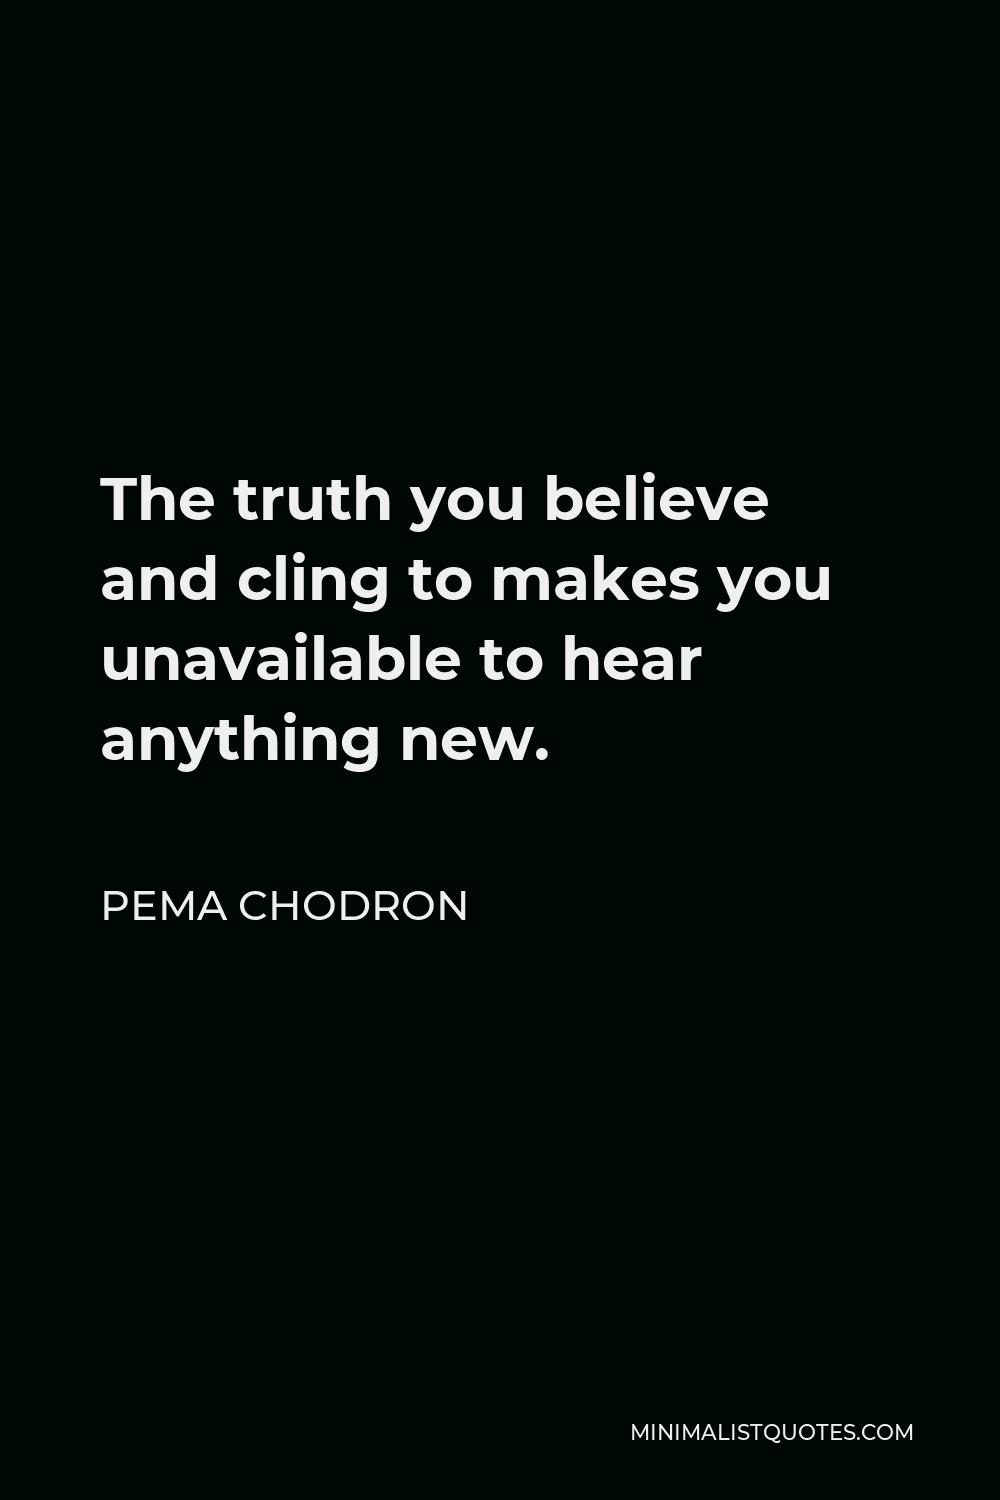 Pema Chodron Quote - The truth you believe and cling to makes you unavailable to hear anything new.